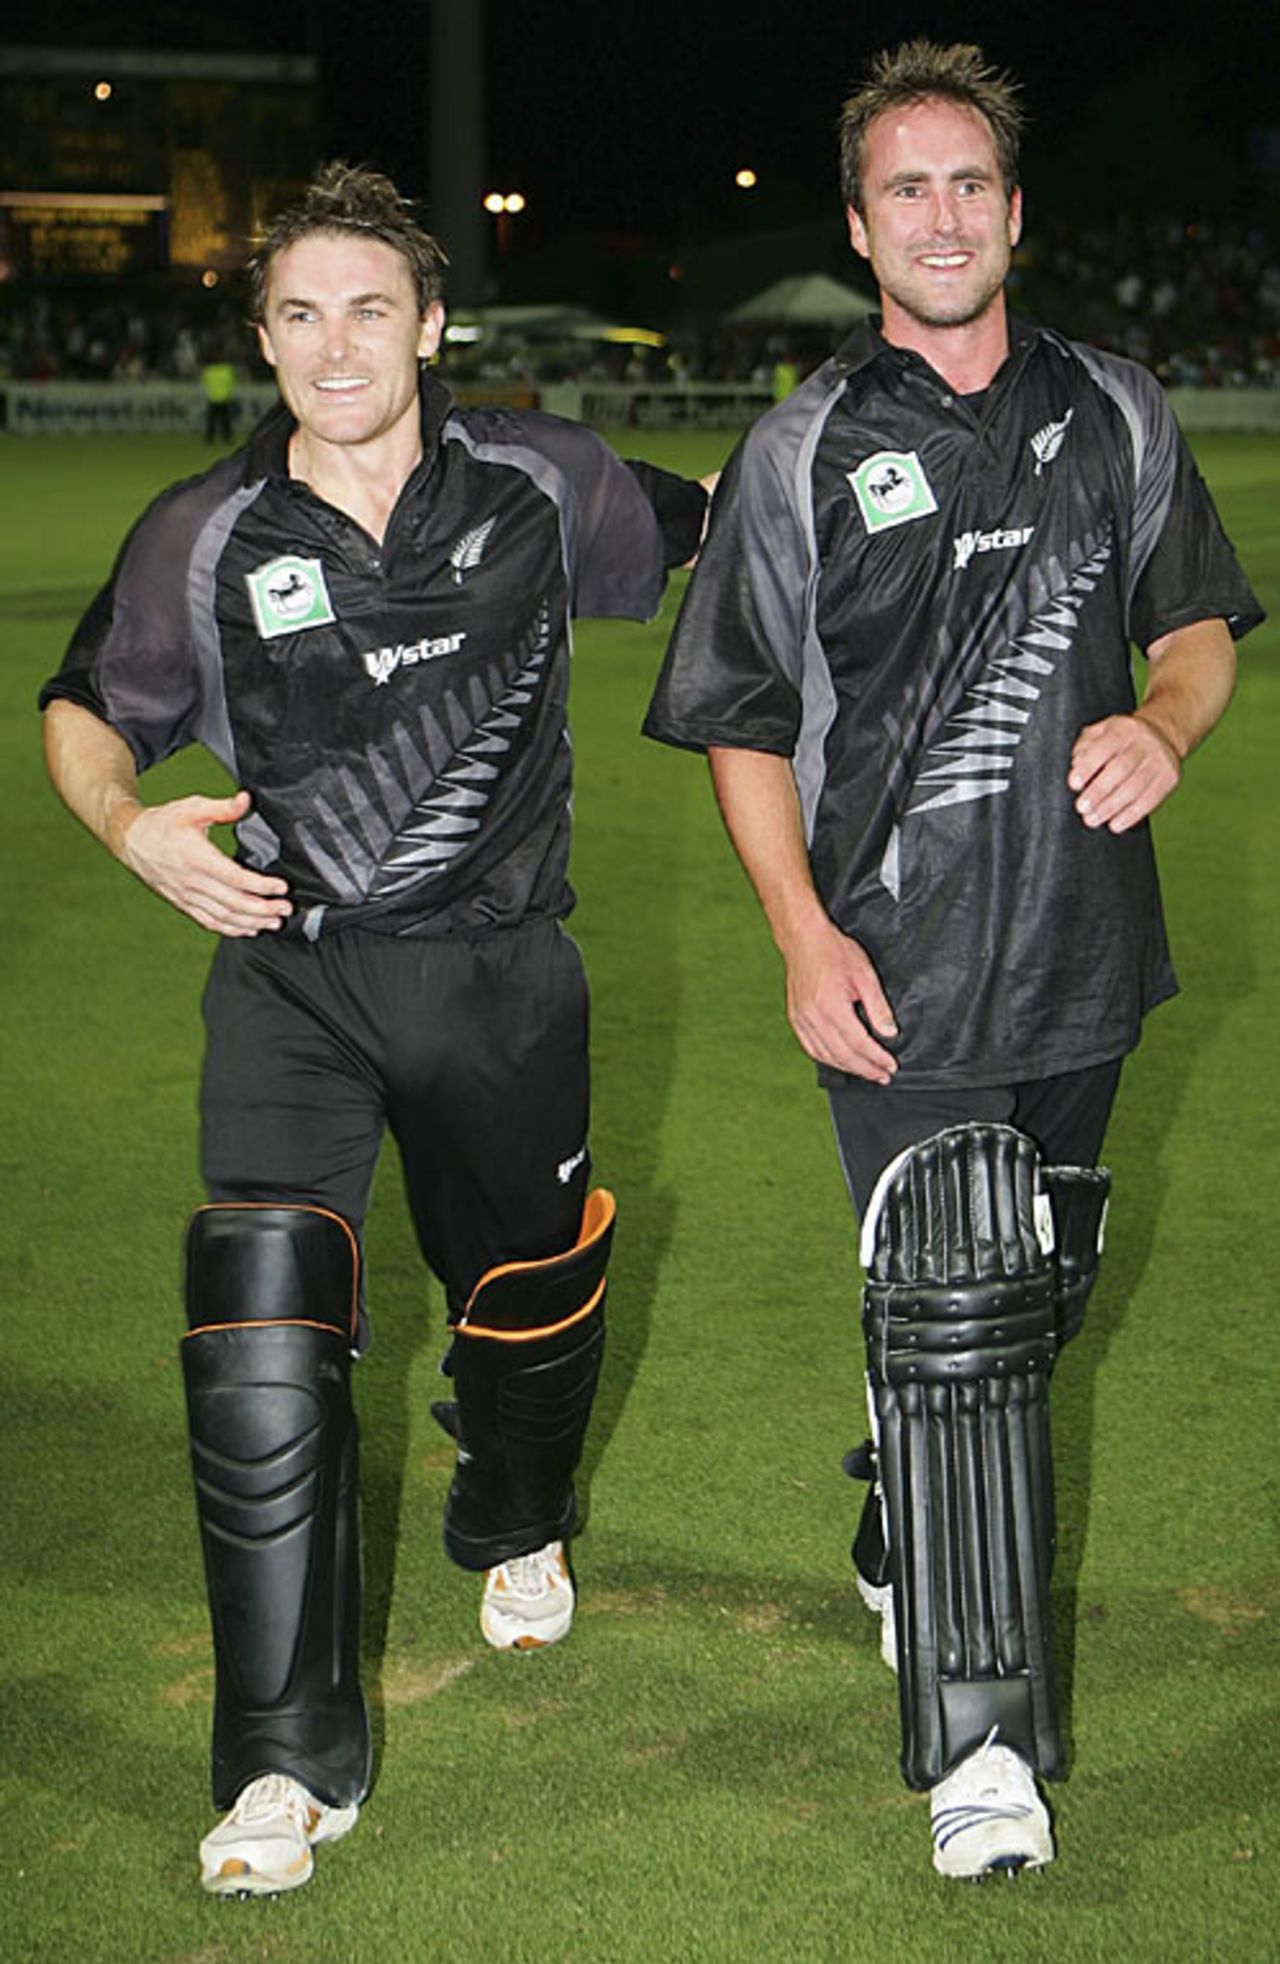 Brendon McCullum and Mark Gillespie walk off, all smiles, after beating Australia 3-0, New Zealand v Australia, Chappell-Hadlee Trophy, 3rd match, Hamilton, February 20, 2007